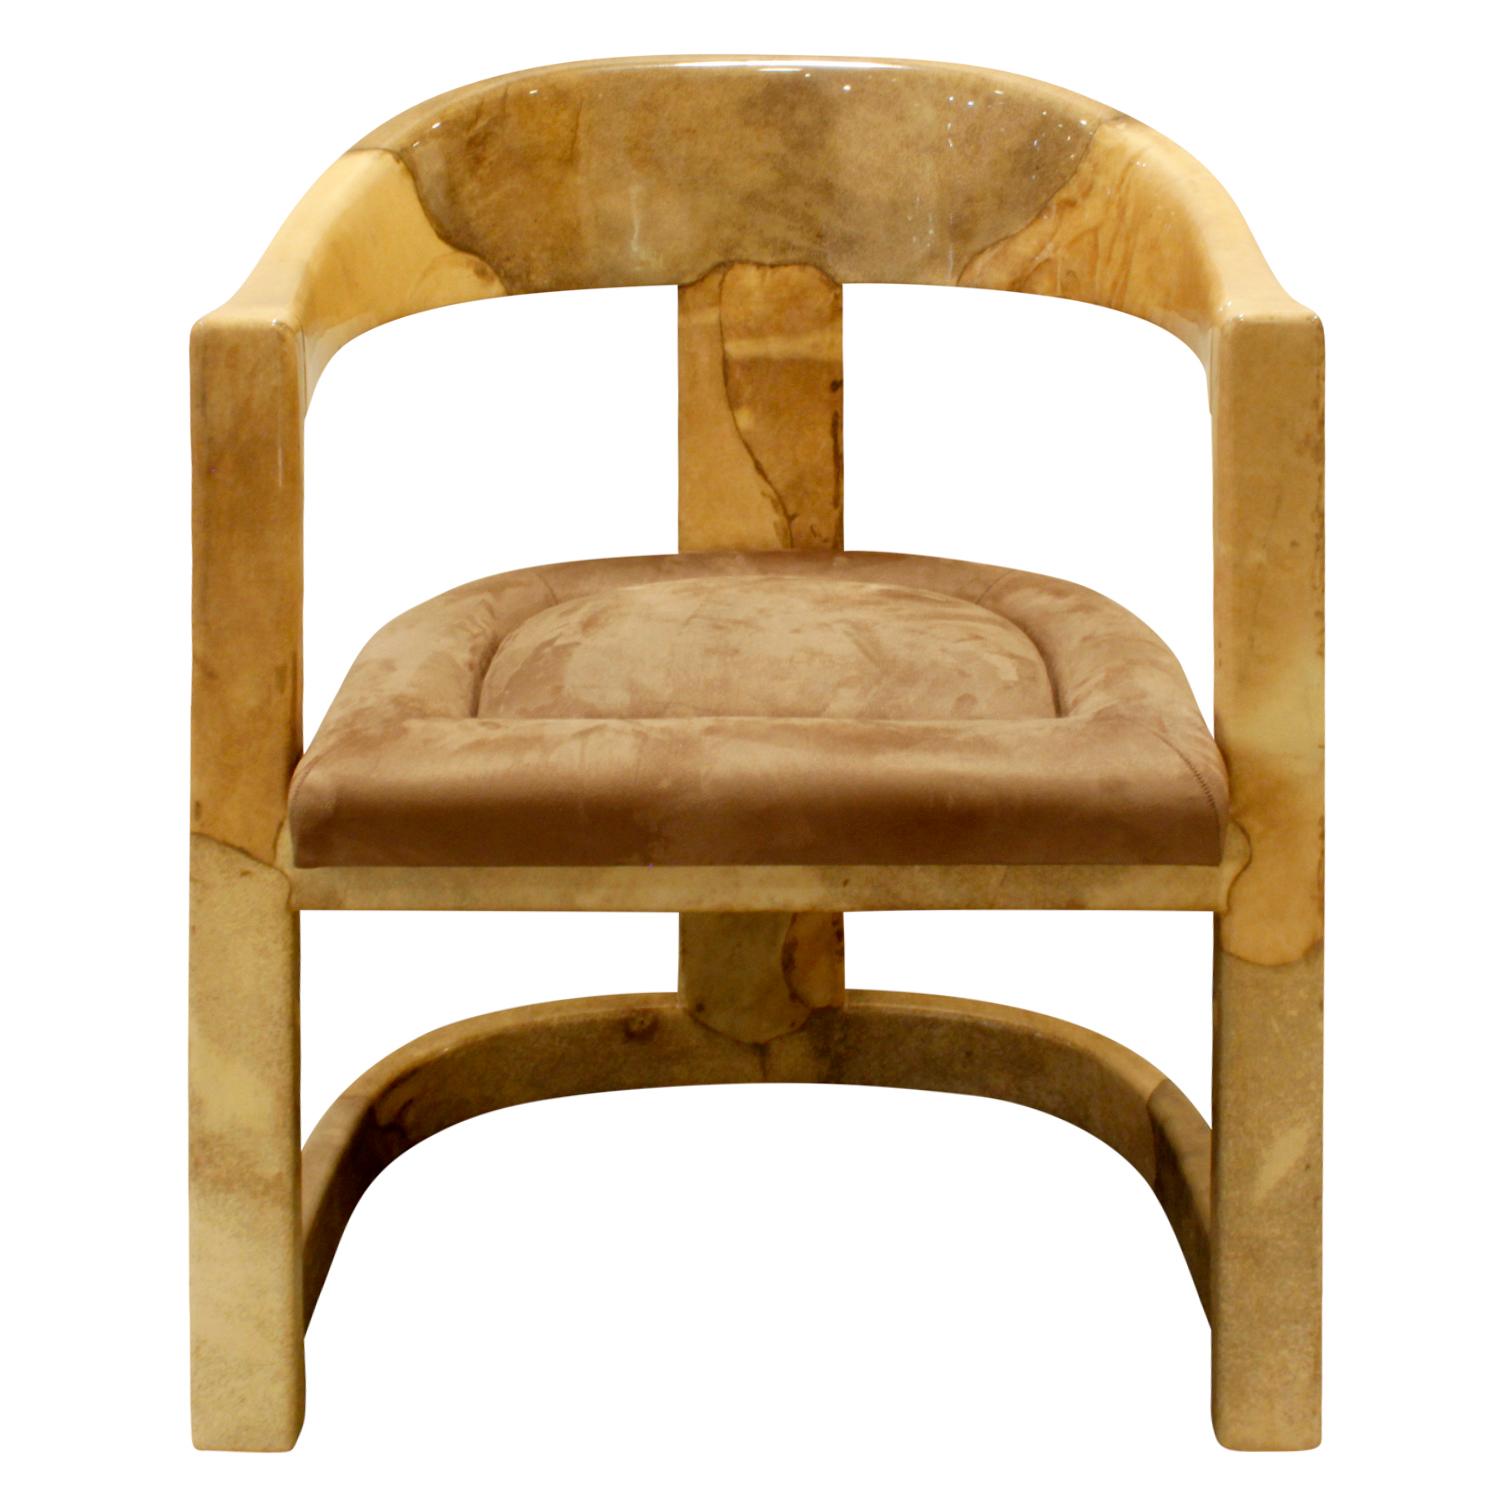 “Onassis Chair” in lacquered goatskin with hand-stitched seat by Karl Springer, American, 1970s. This is a beautiful example of Karl Springers meticulous craftsmanship.